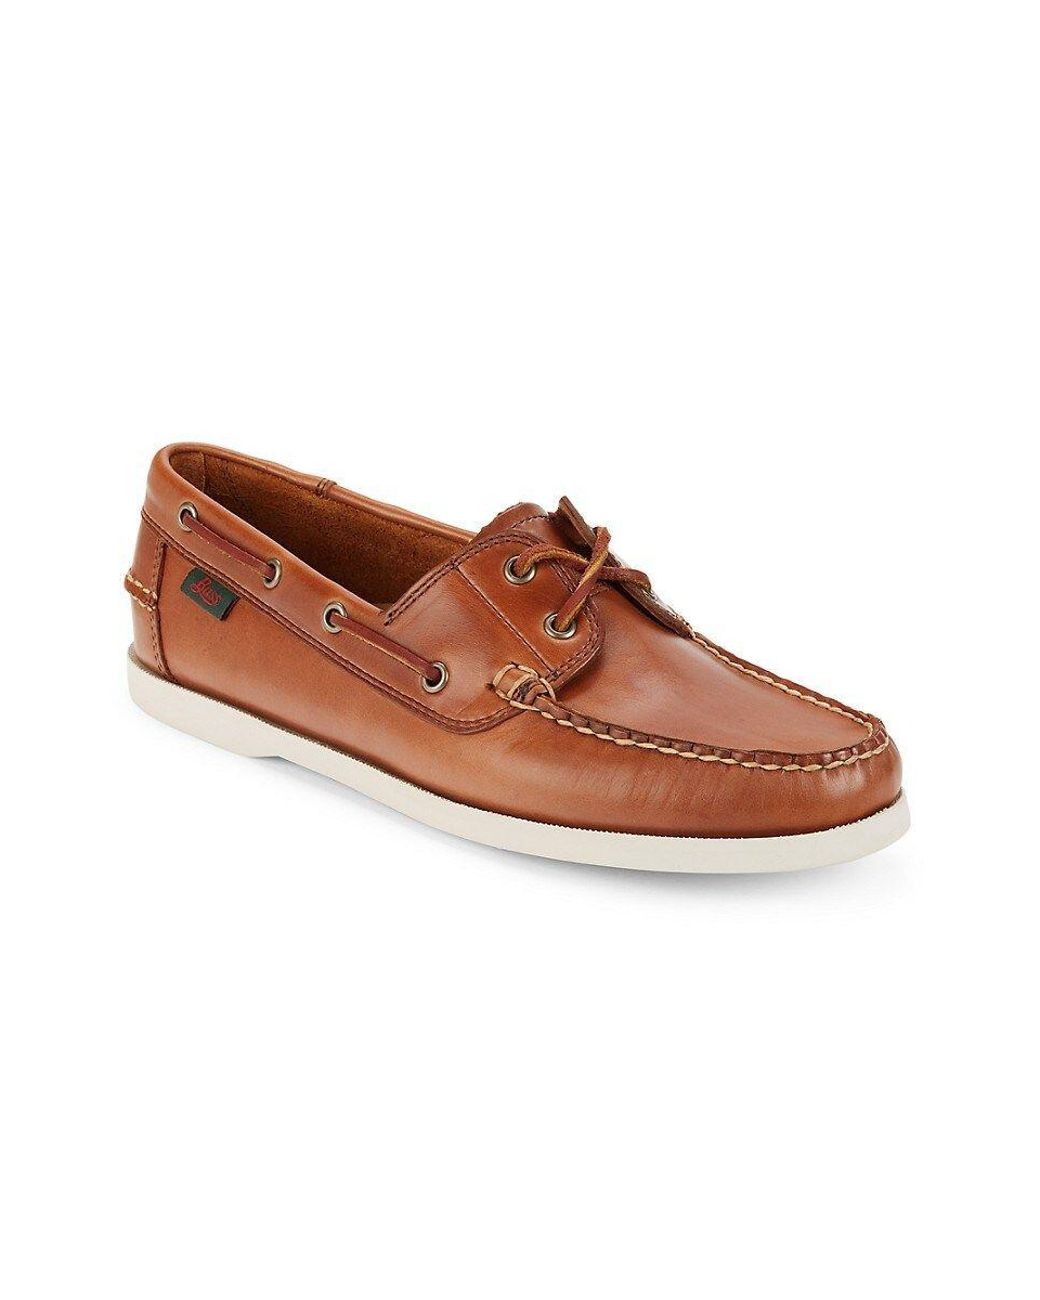 G.H. Bass & Co. G.h.bass Ranger Super Lug Camp Moc Hand Sewn Boat Shoes in  Brown for Men